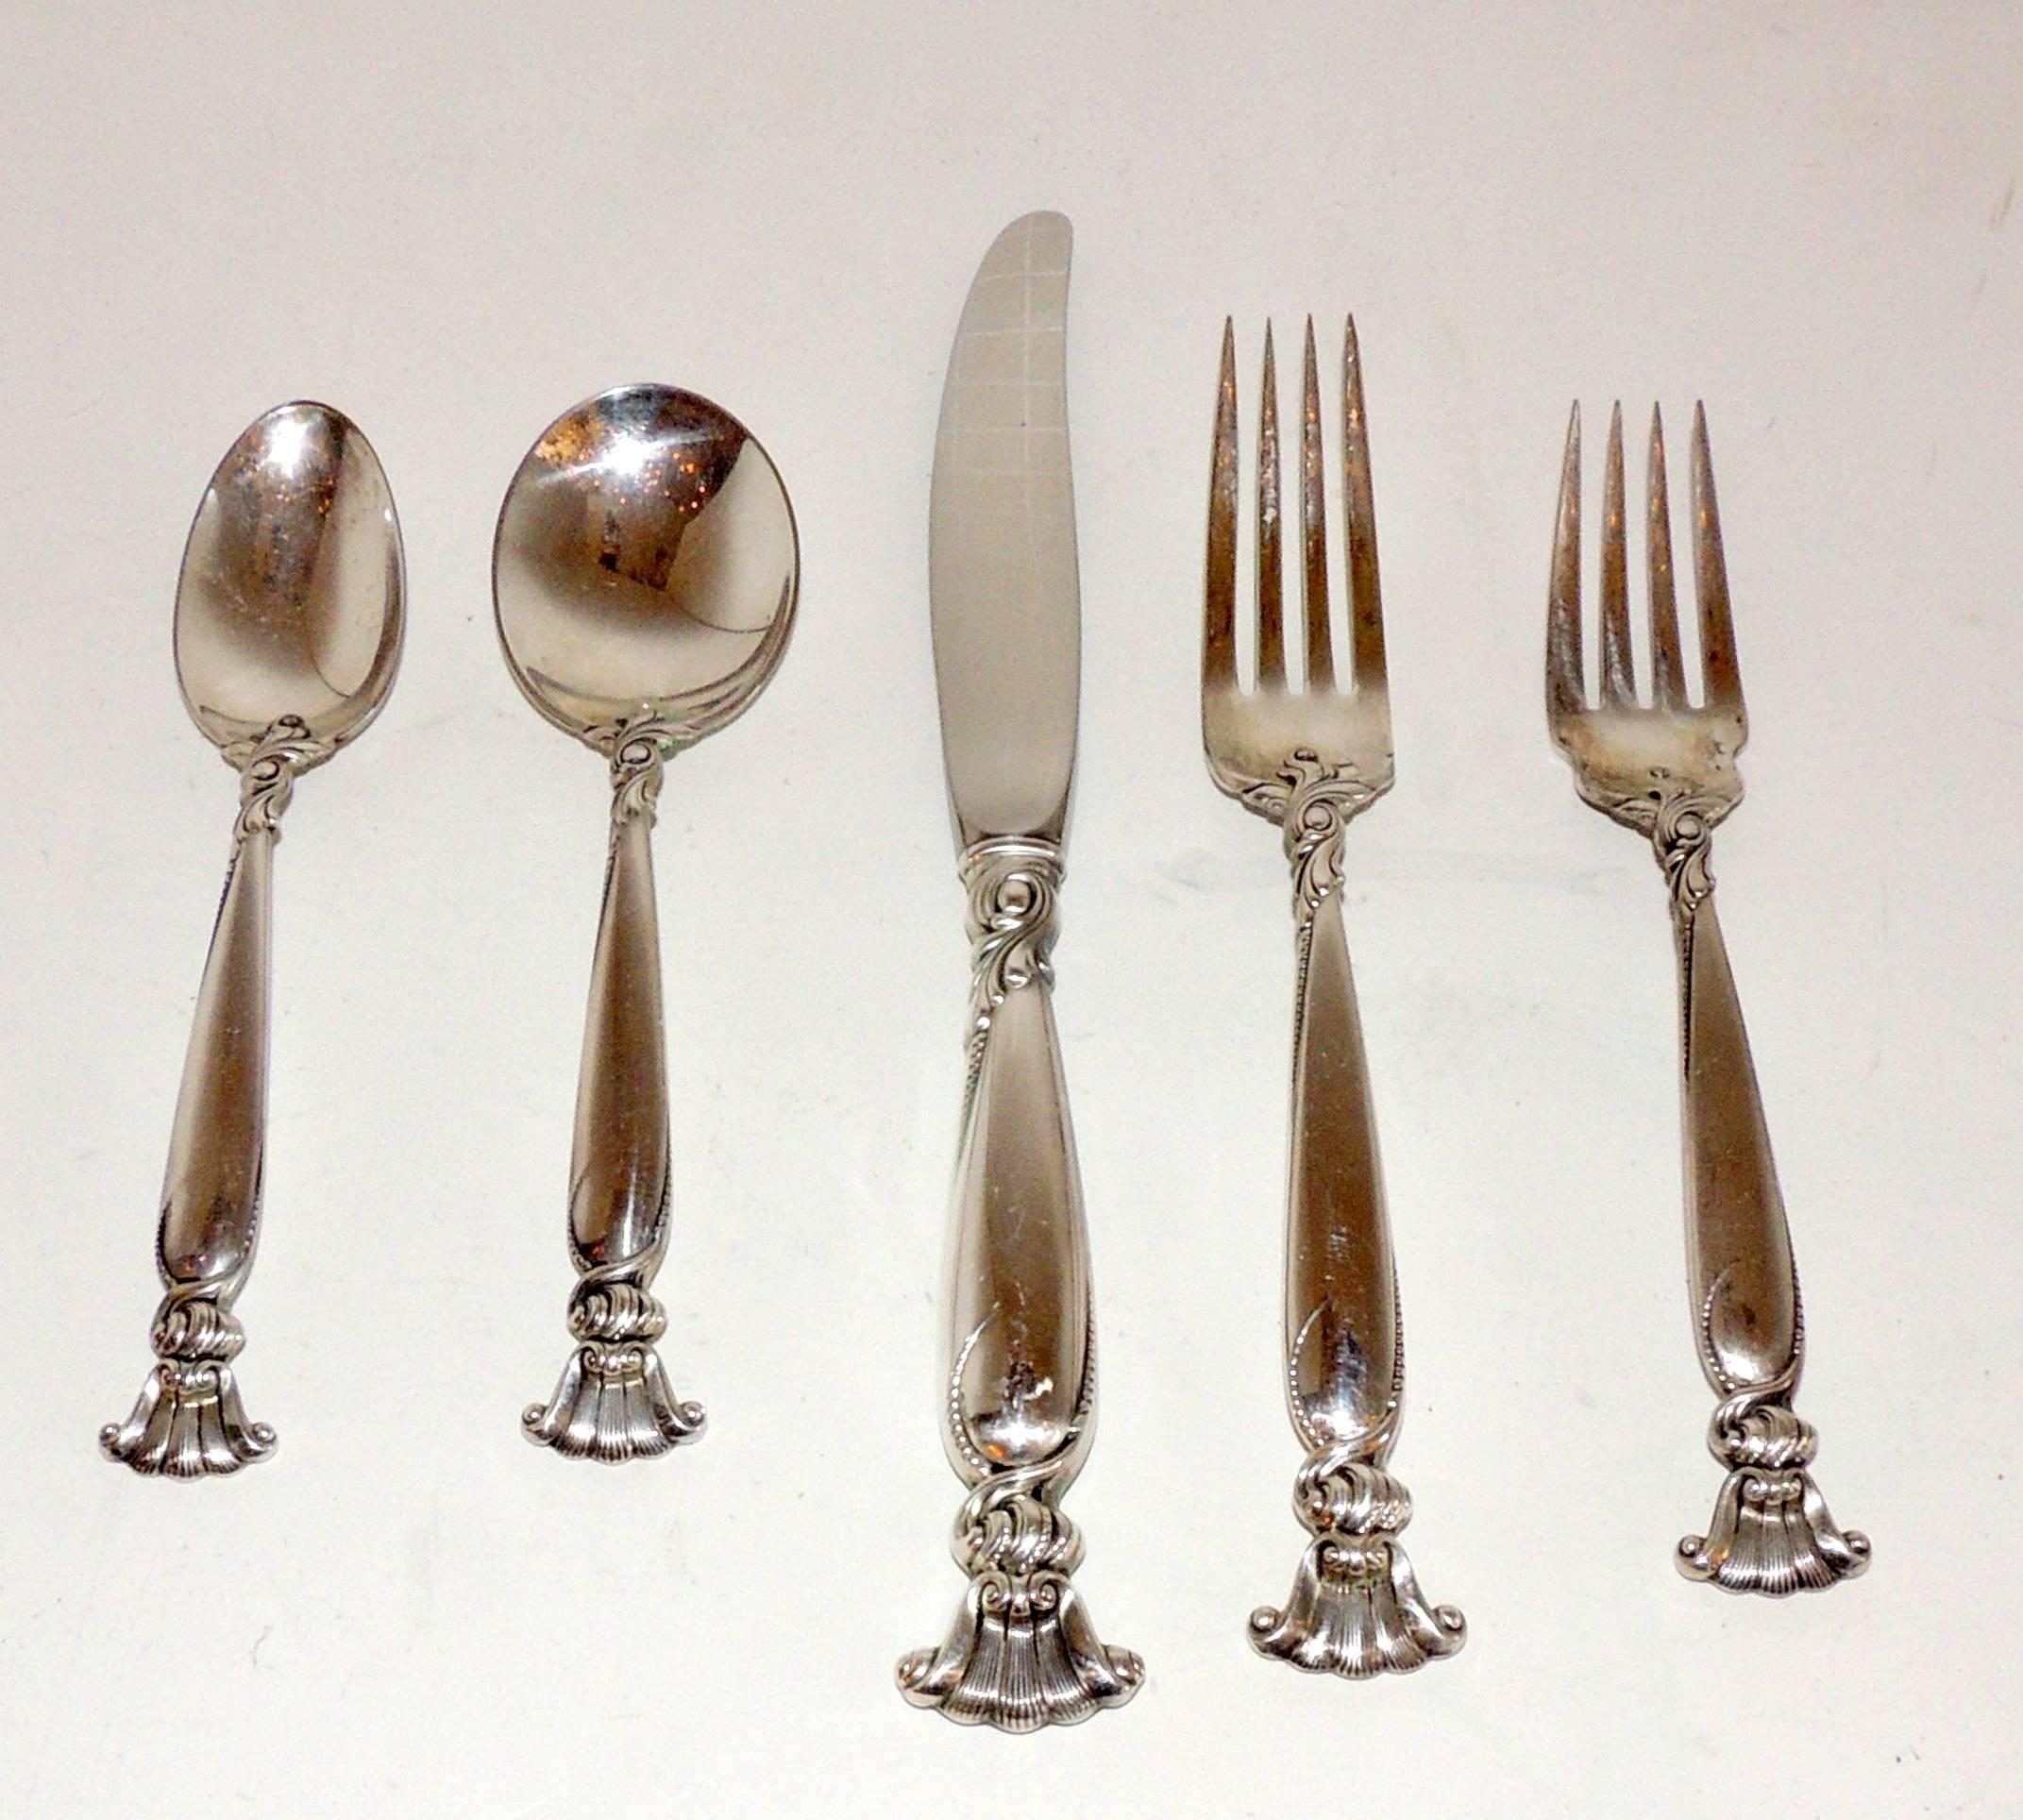 A wonderful Wallace sterling silver flatware service for 12 Romance of The Sea Pattern 63 pieces total, set consisting of:
9